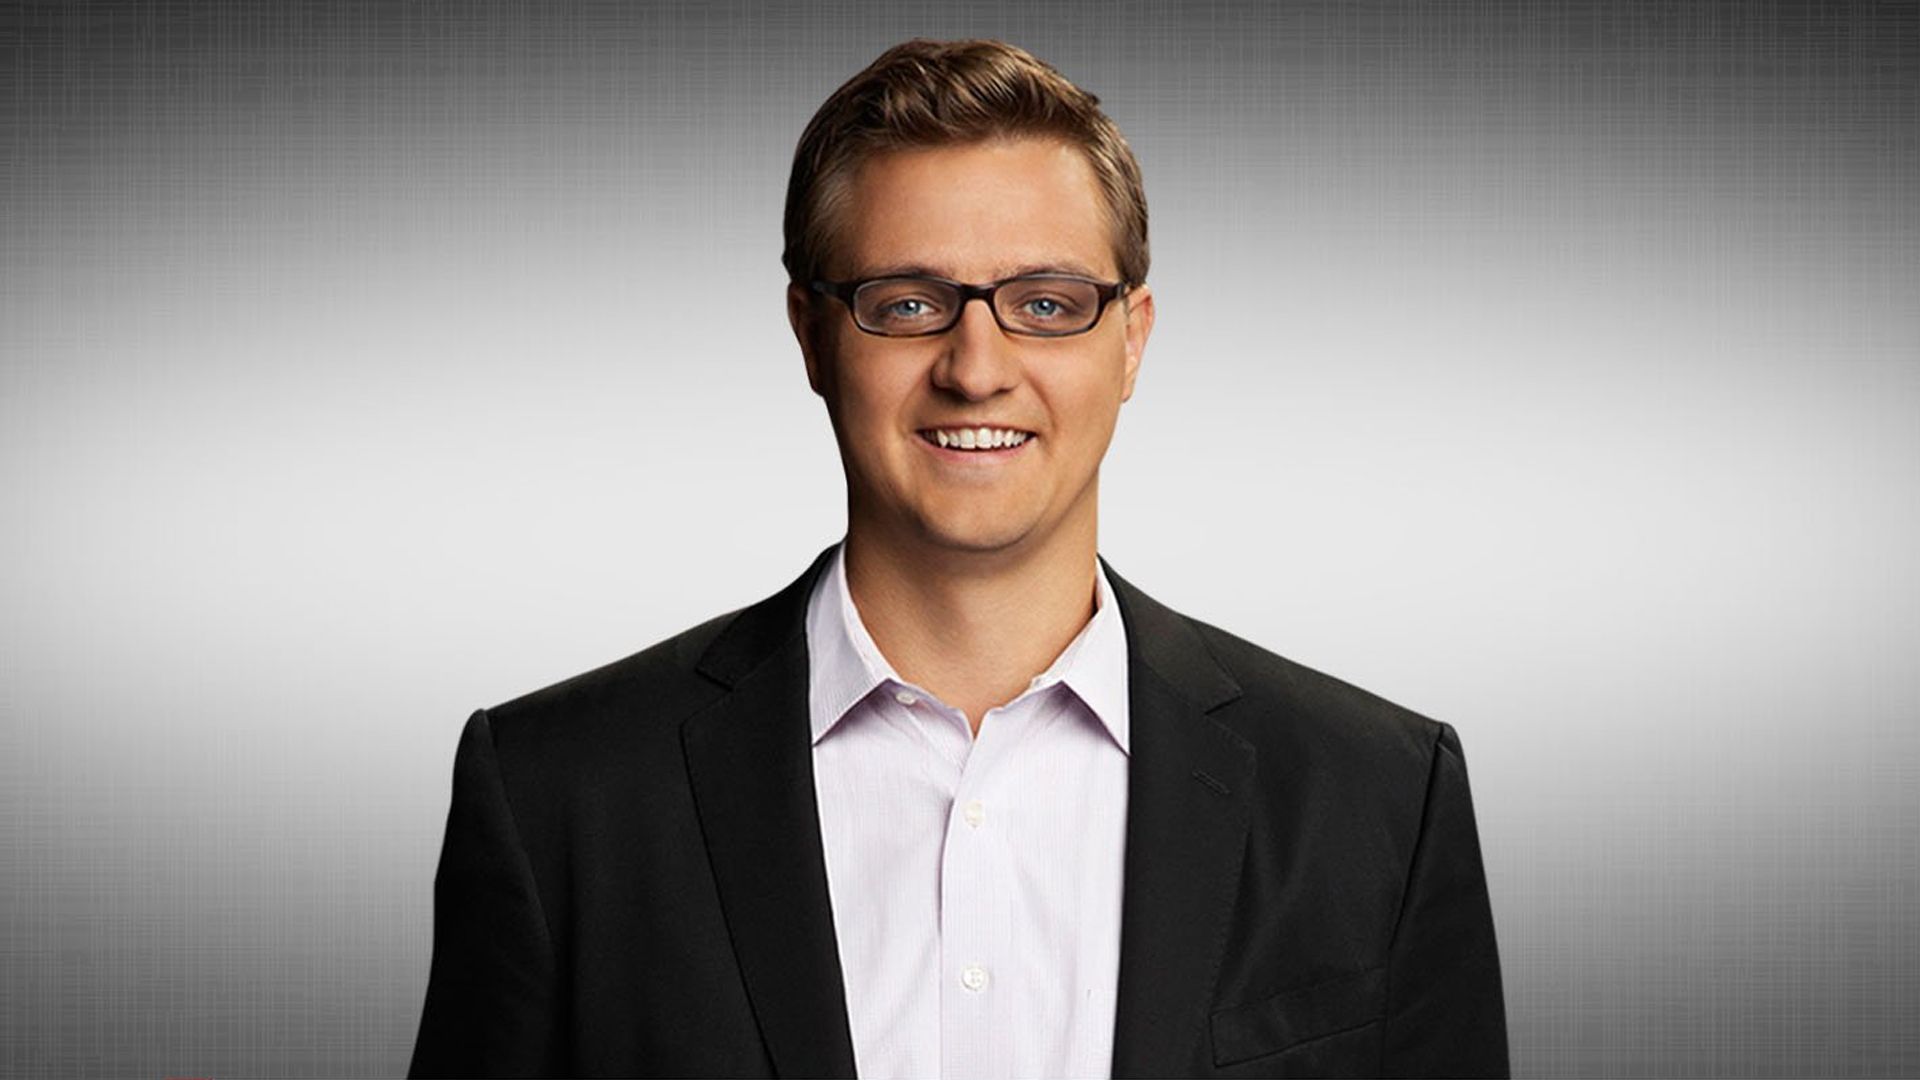 All in with Chris Hayes background